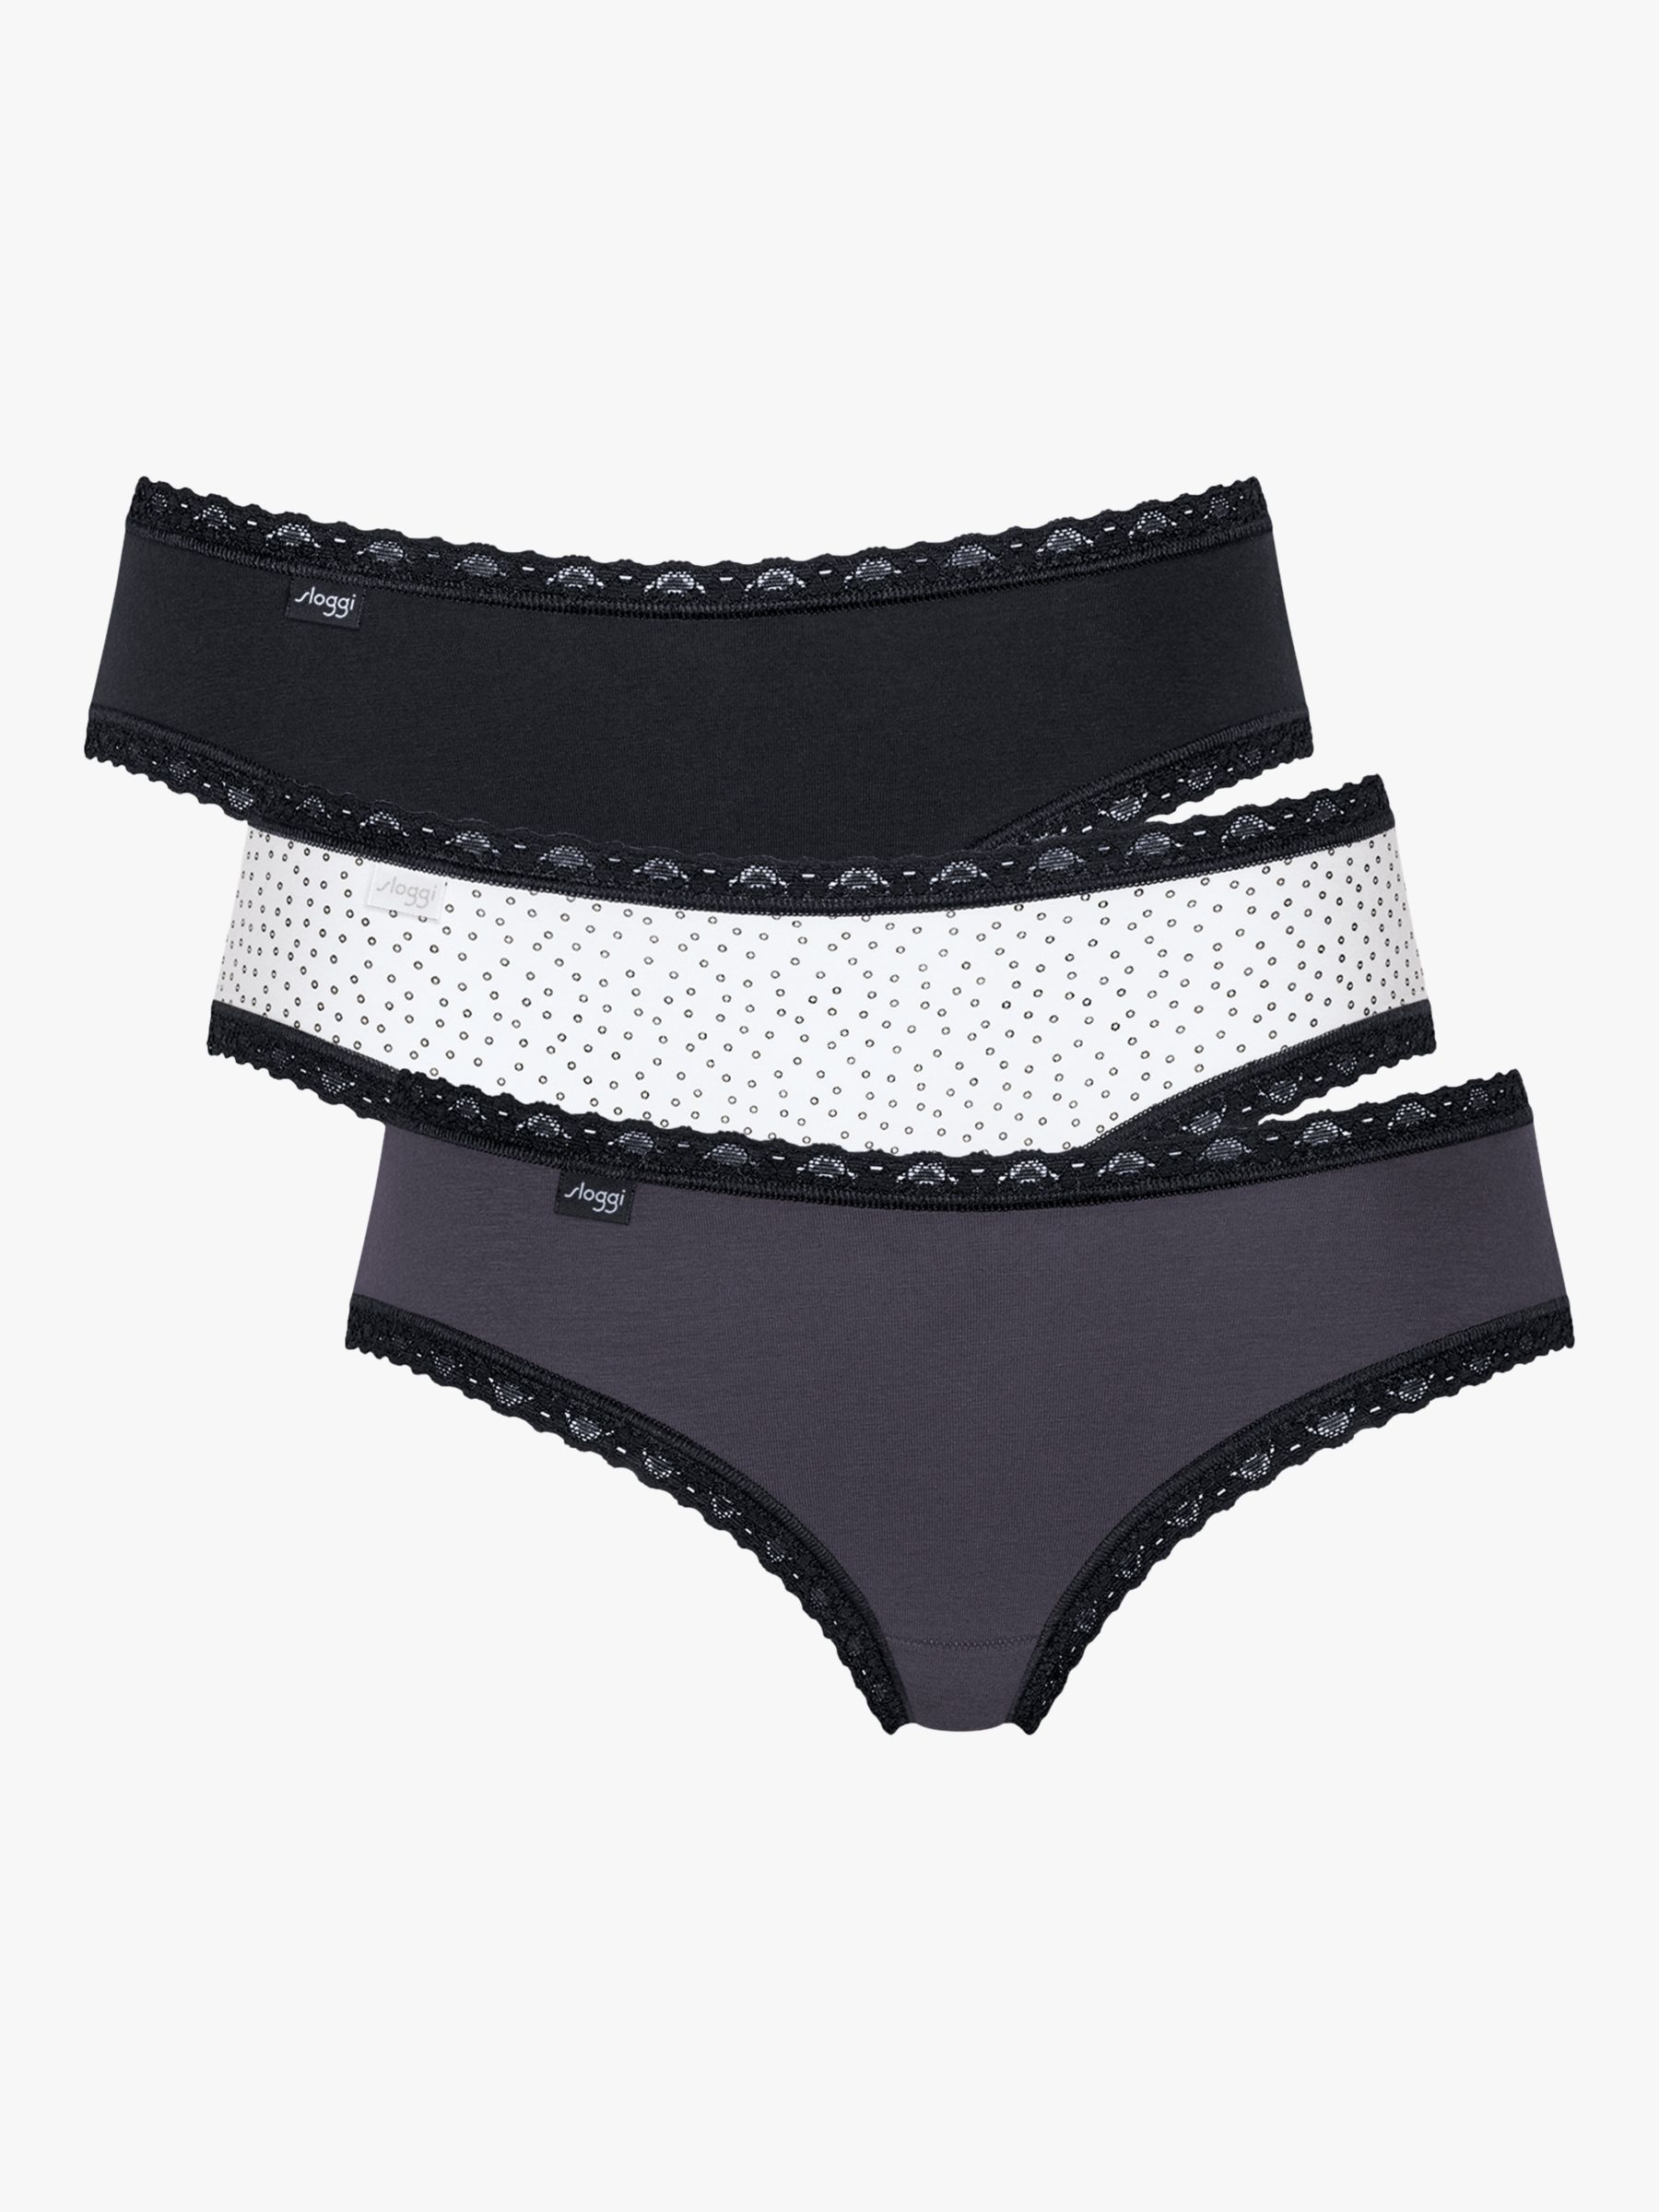 sloggi 24/7 Weekend Hipster Knickers, Pack of 3, Black Combination at John  Lewis & Partners